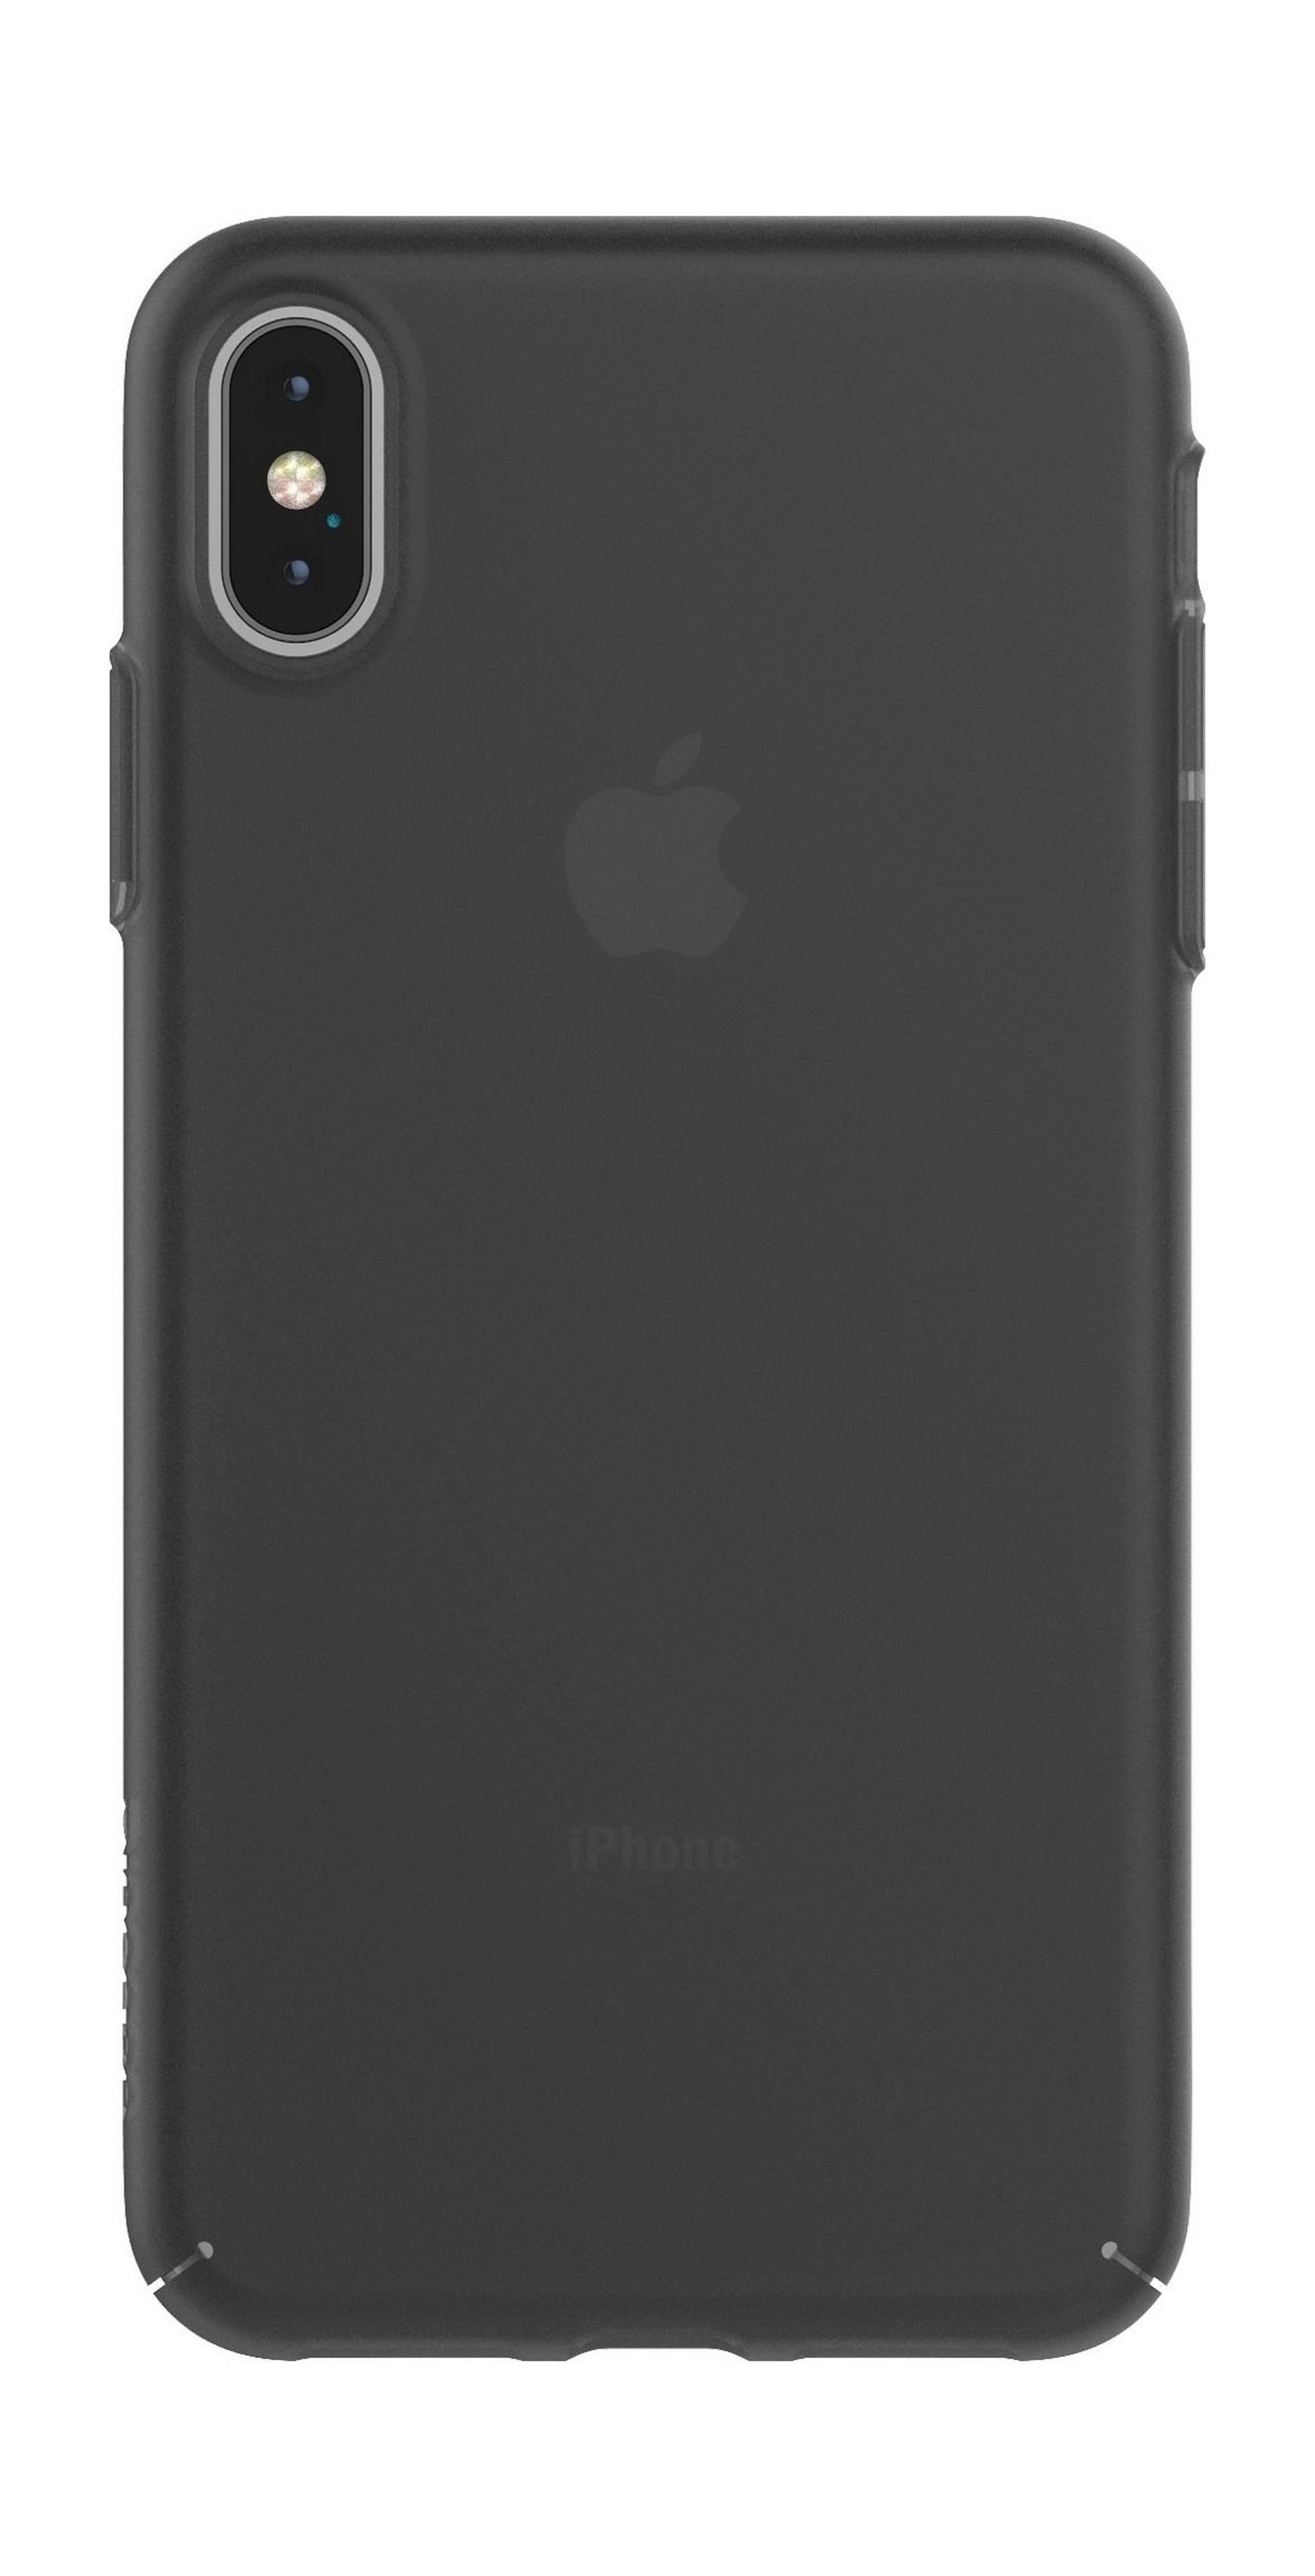 Incase Lift Case For iPhone XS Max (INPH220548) - Graphite